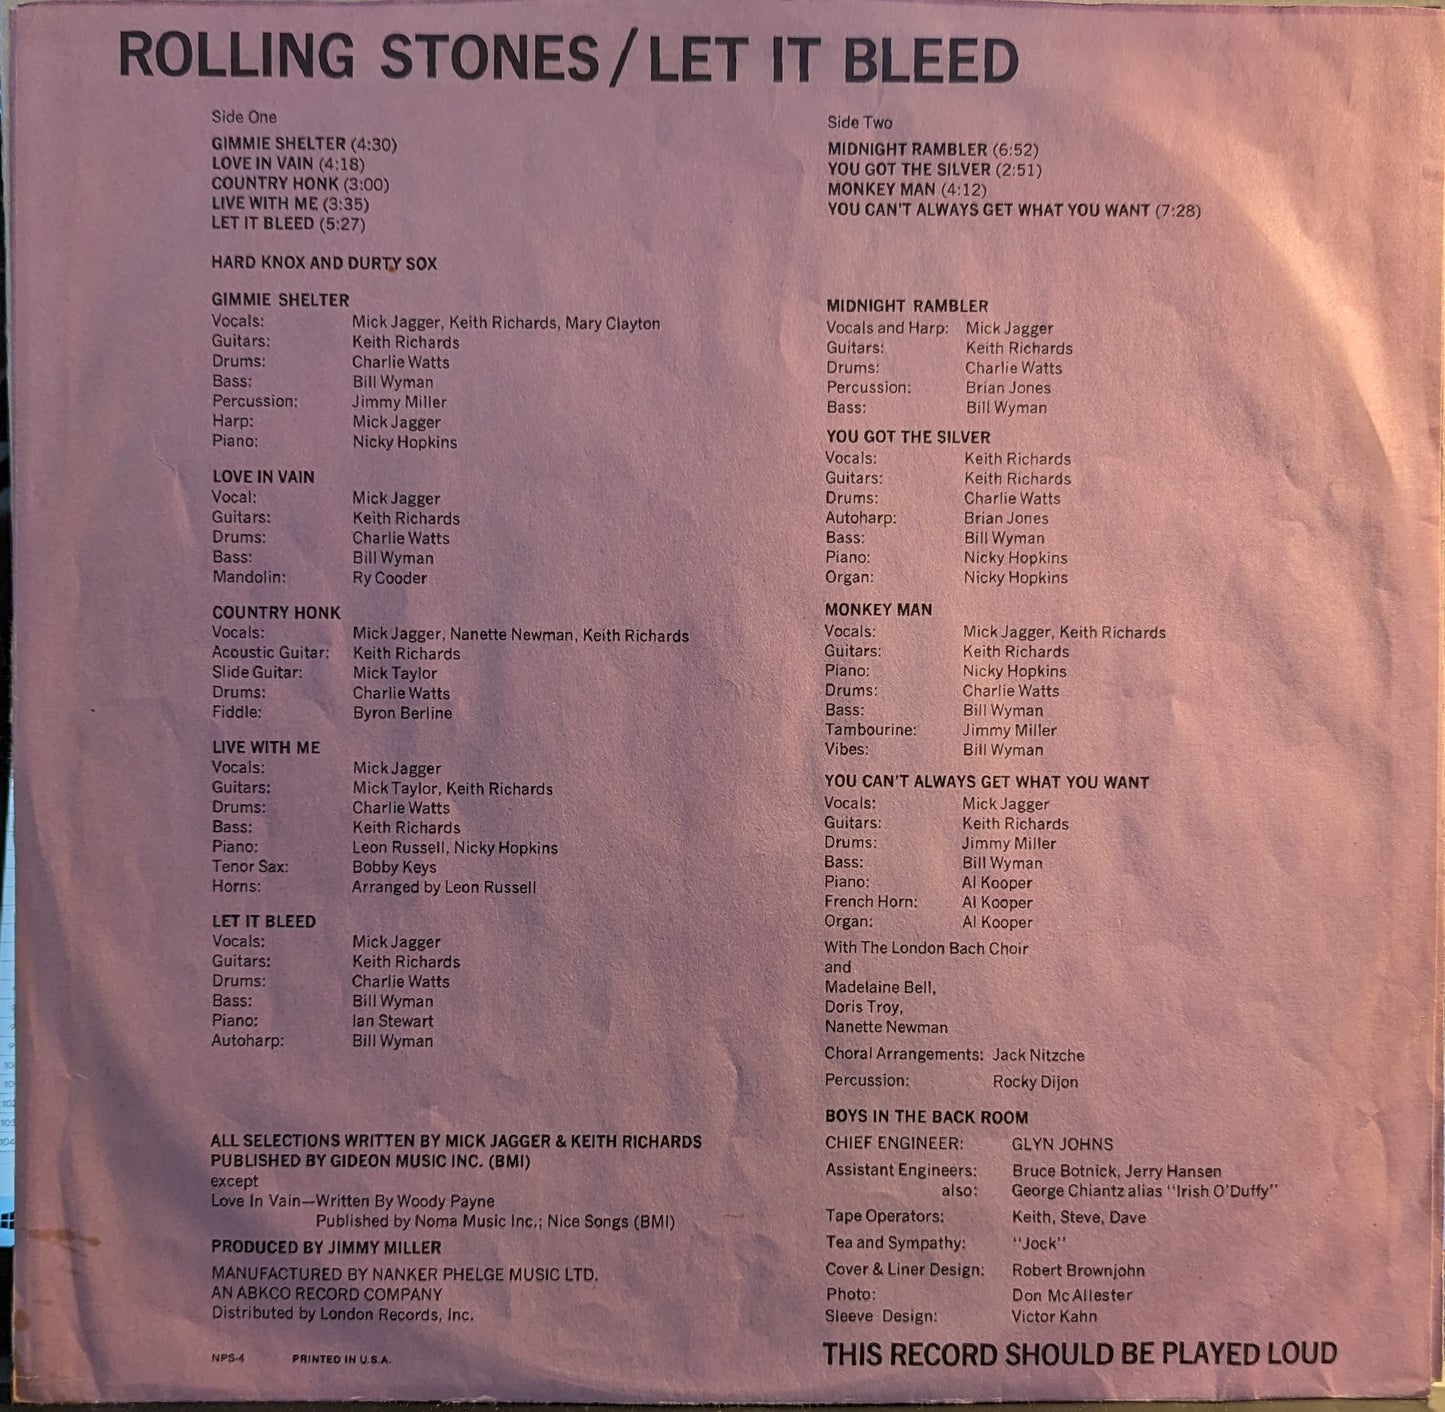 The Rolling Stones Let It Bleed *SHELLEY* LP Excellent (EX) Near Mint (NM or M-)